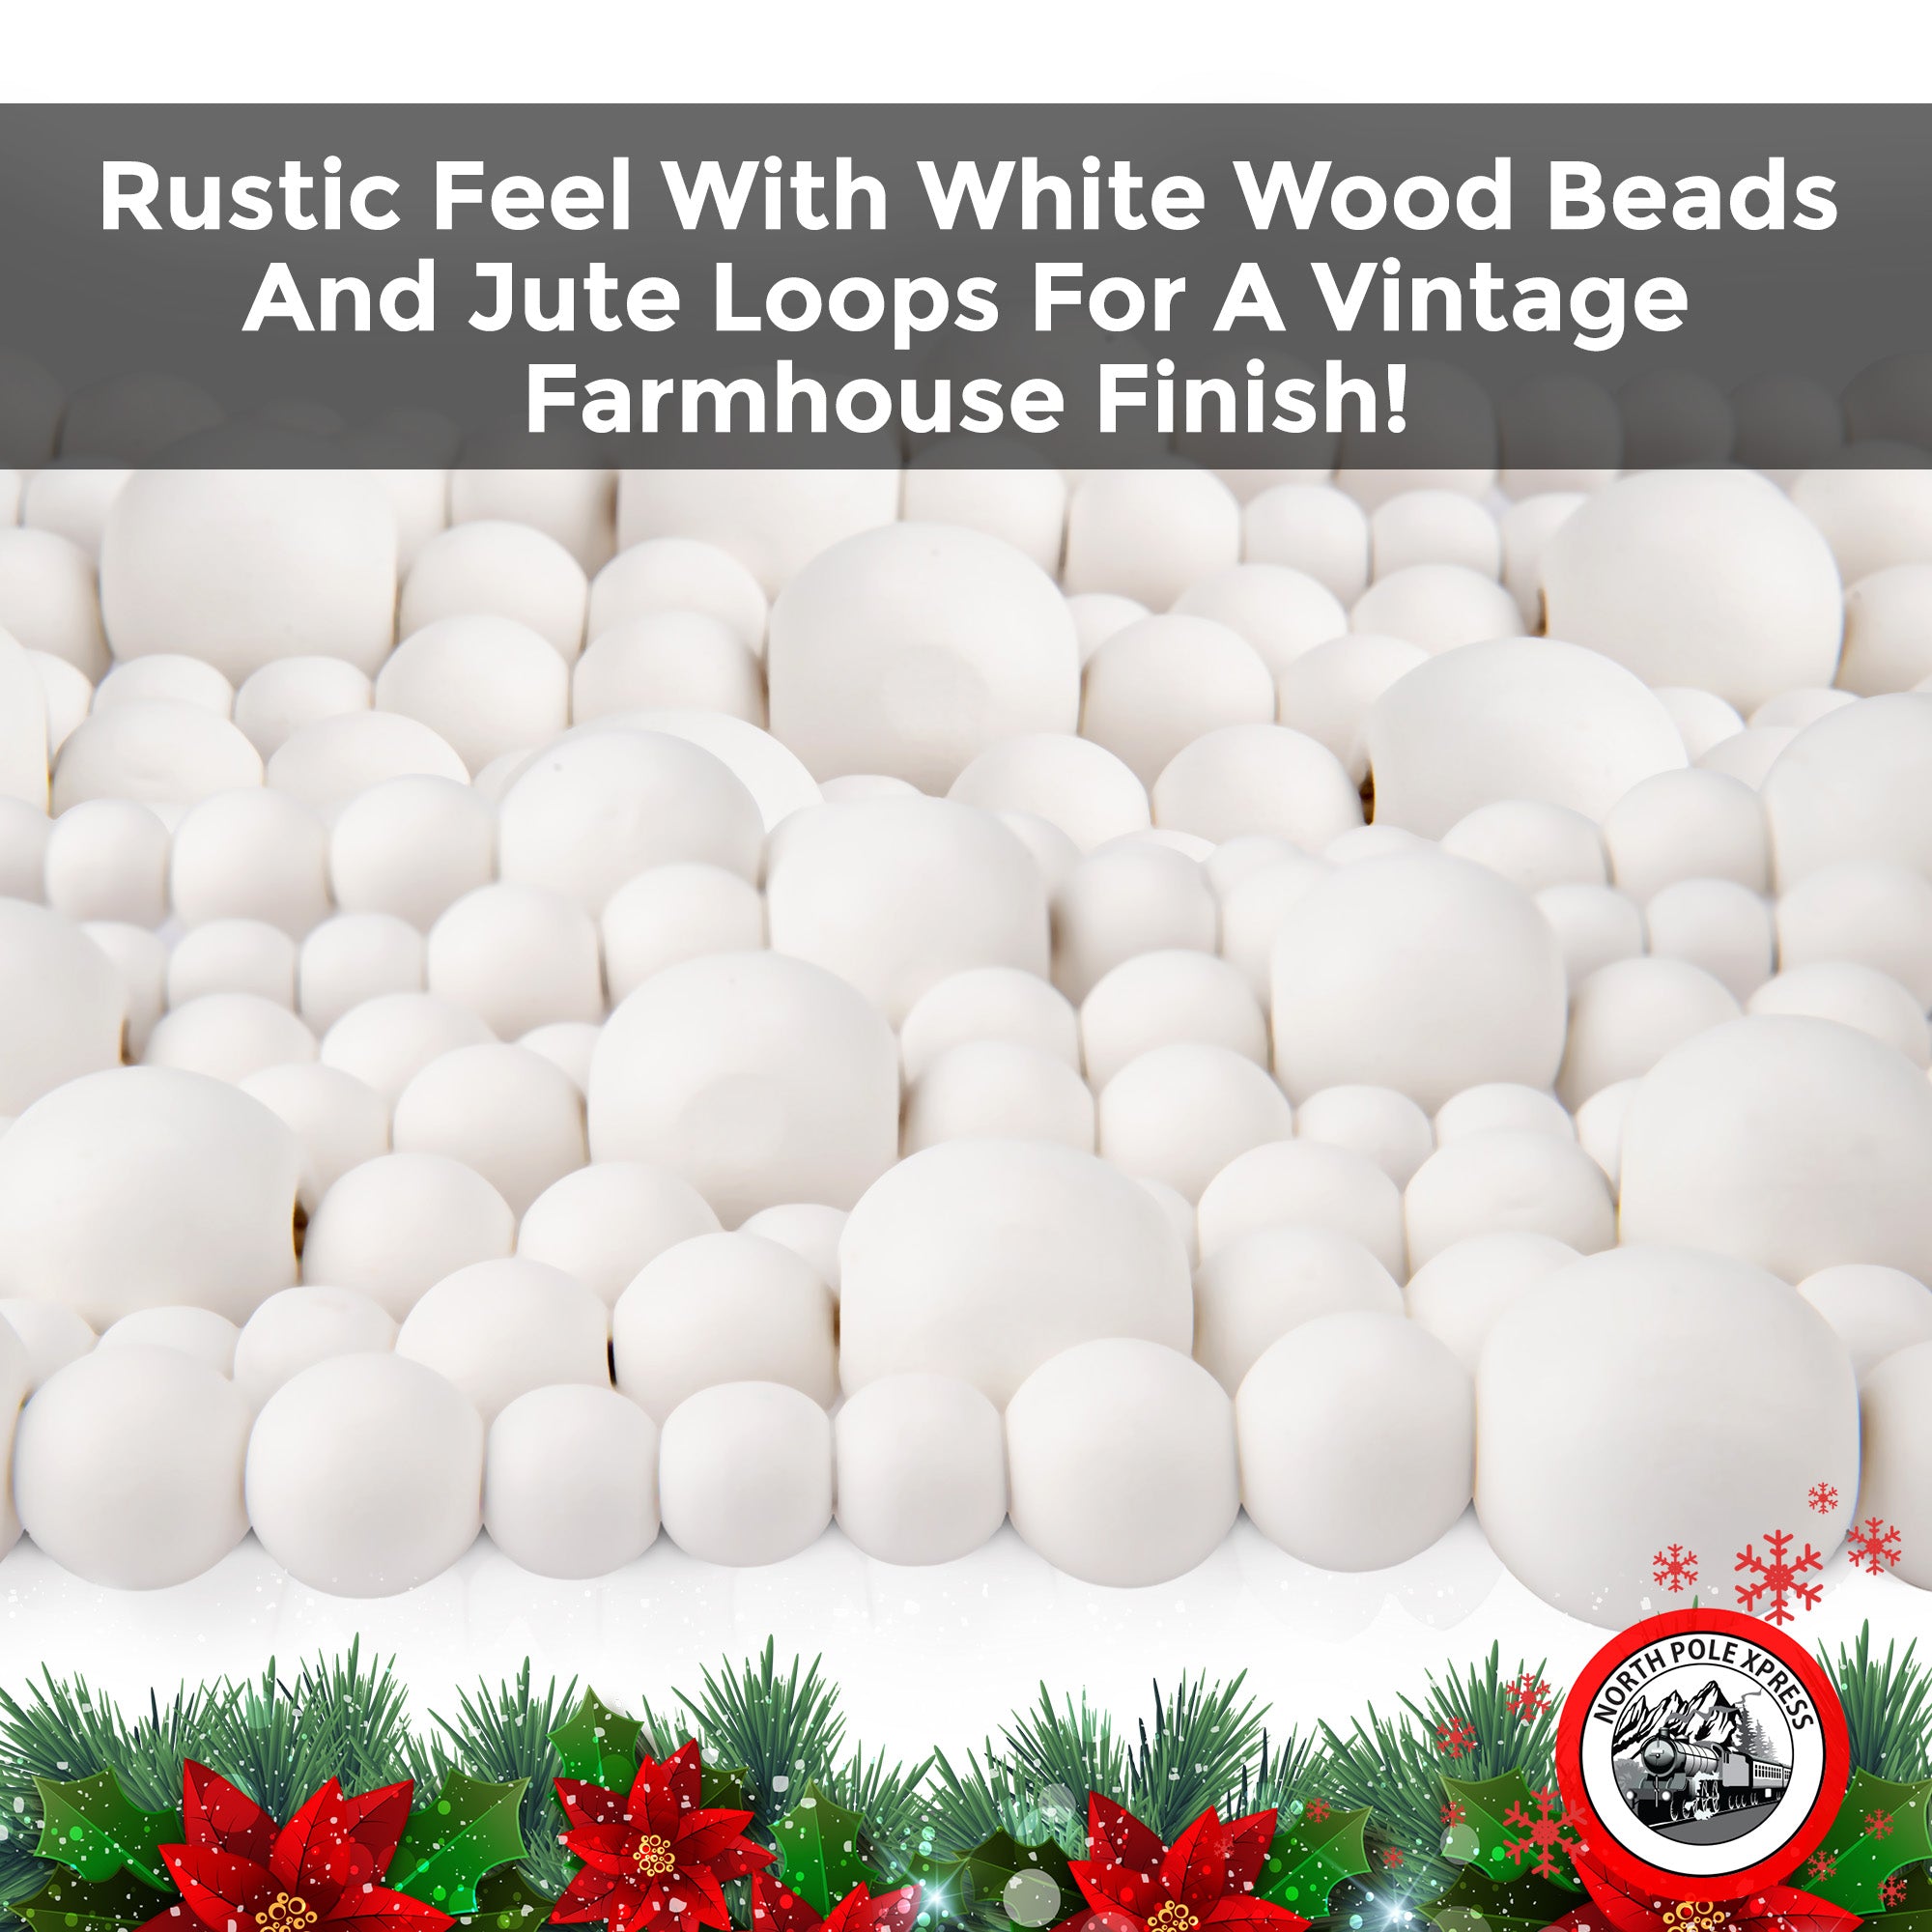 9-Foot Vintage Rustic White, Silver and Unfinished Wood Bead